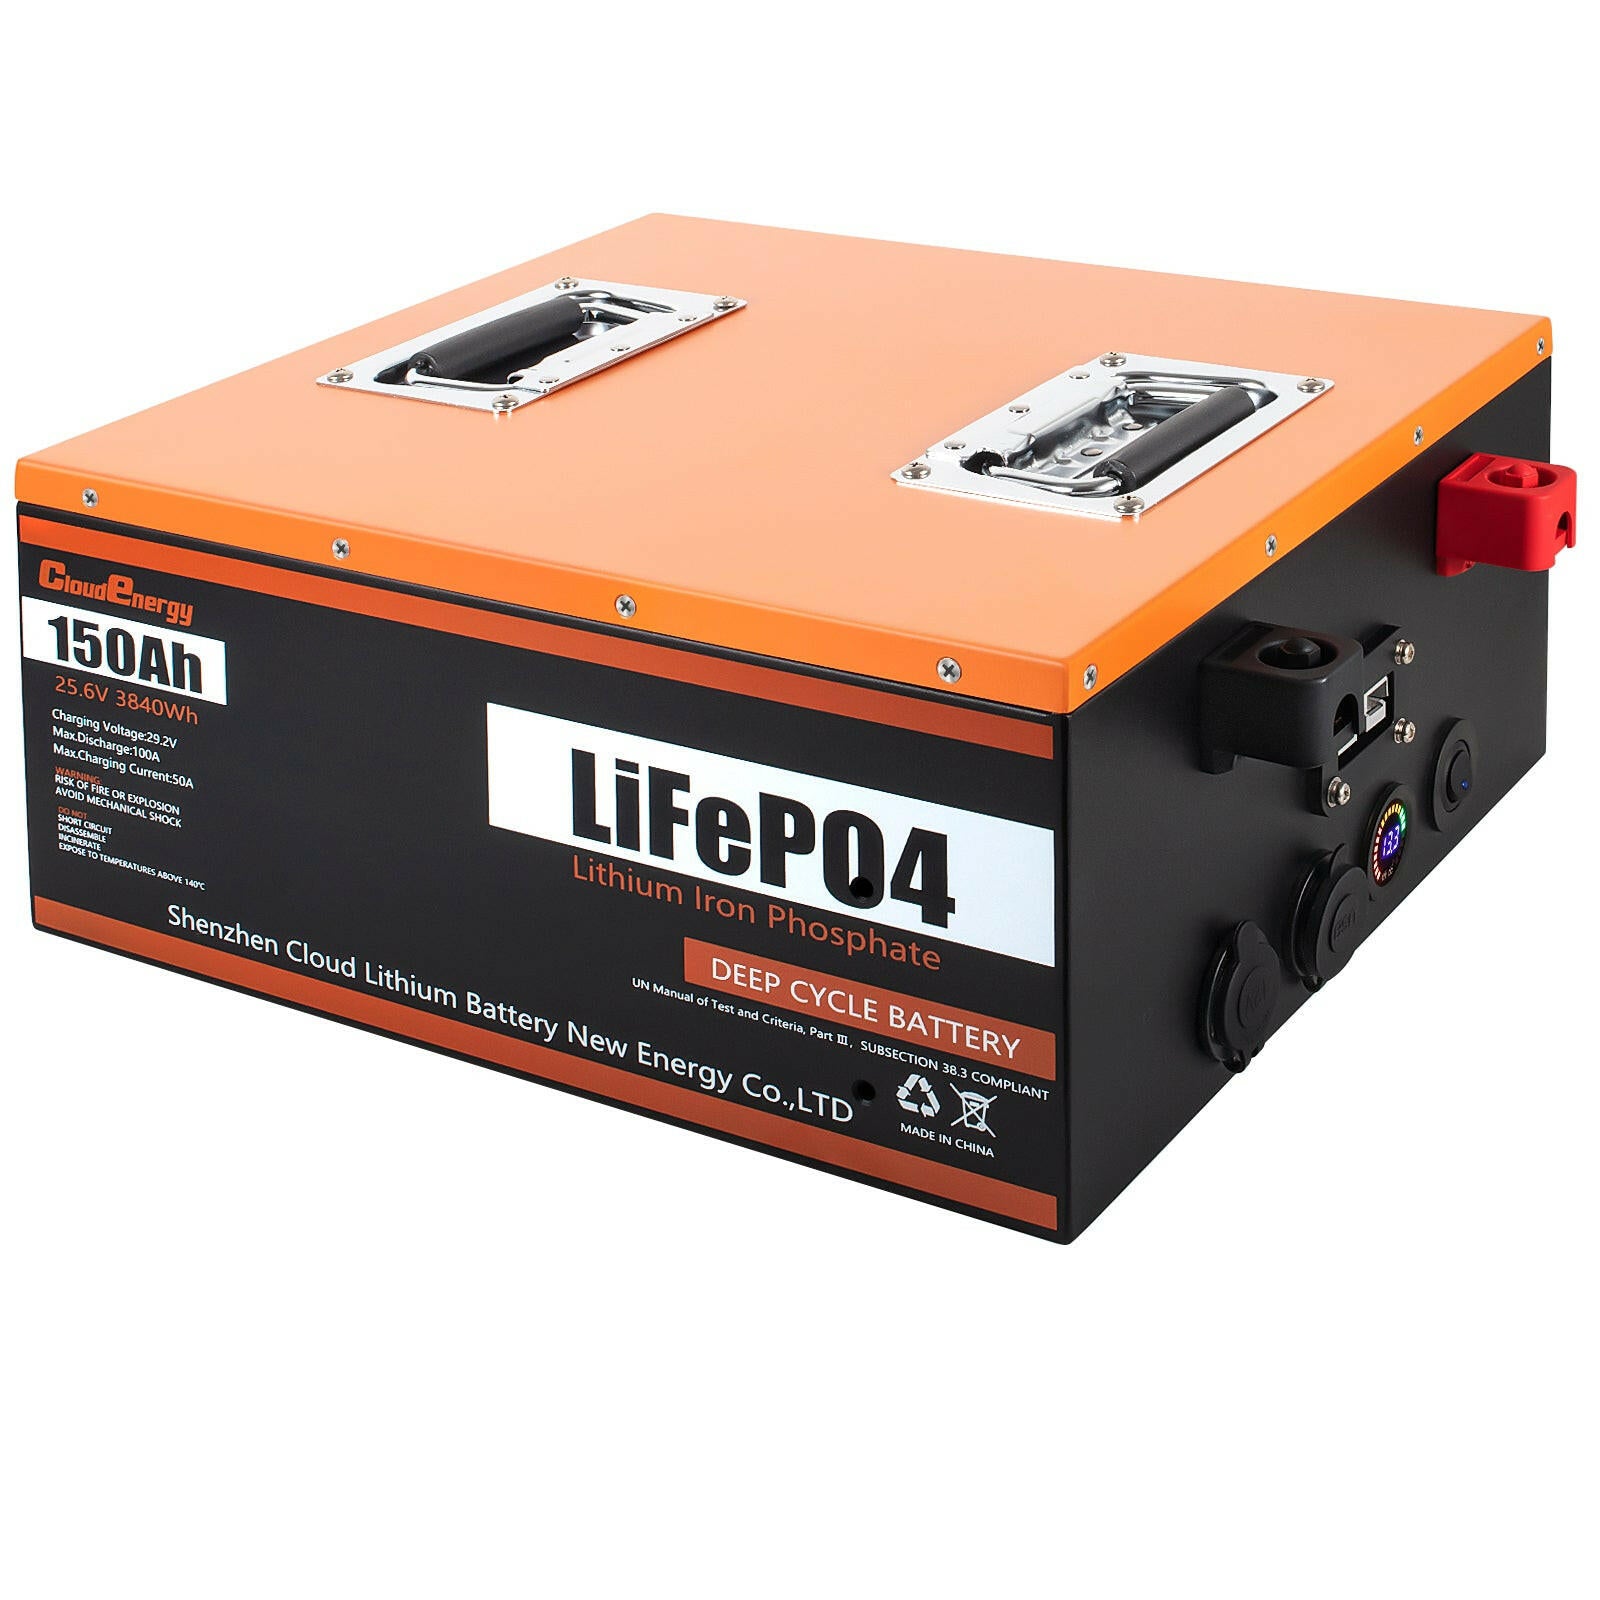 CloudEnergy 24V 150Ah LiFePO4 Lithium Battery, Build-In 100A BMS, 3840Wh Energy - CloudEnergy